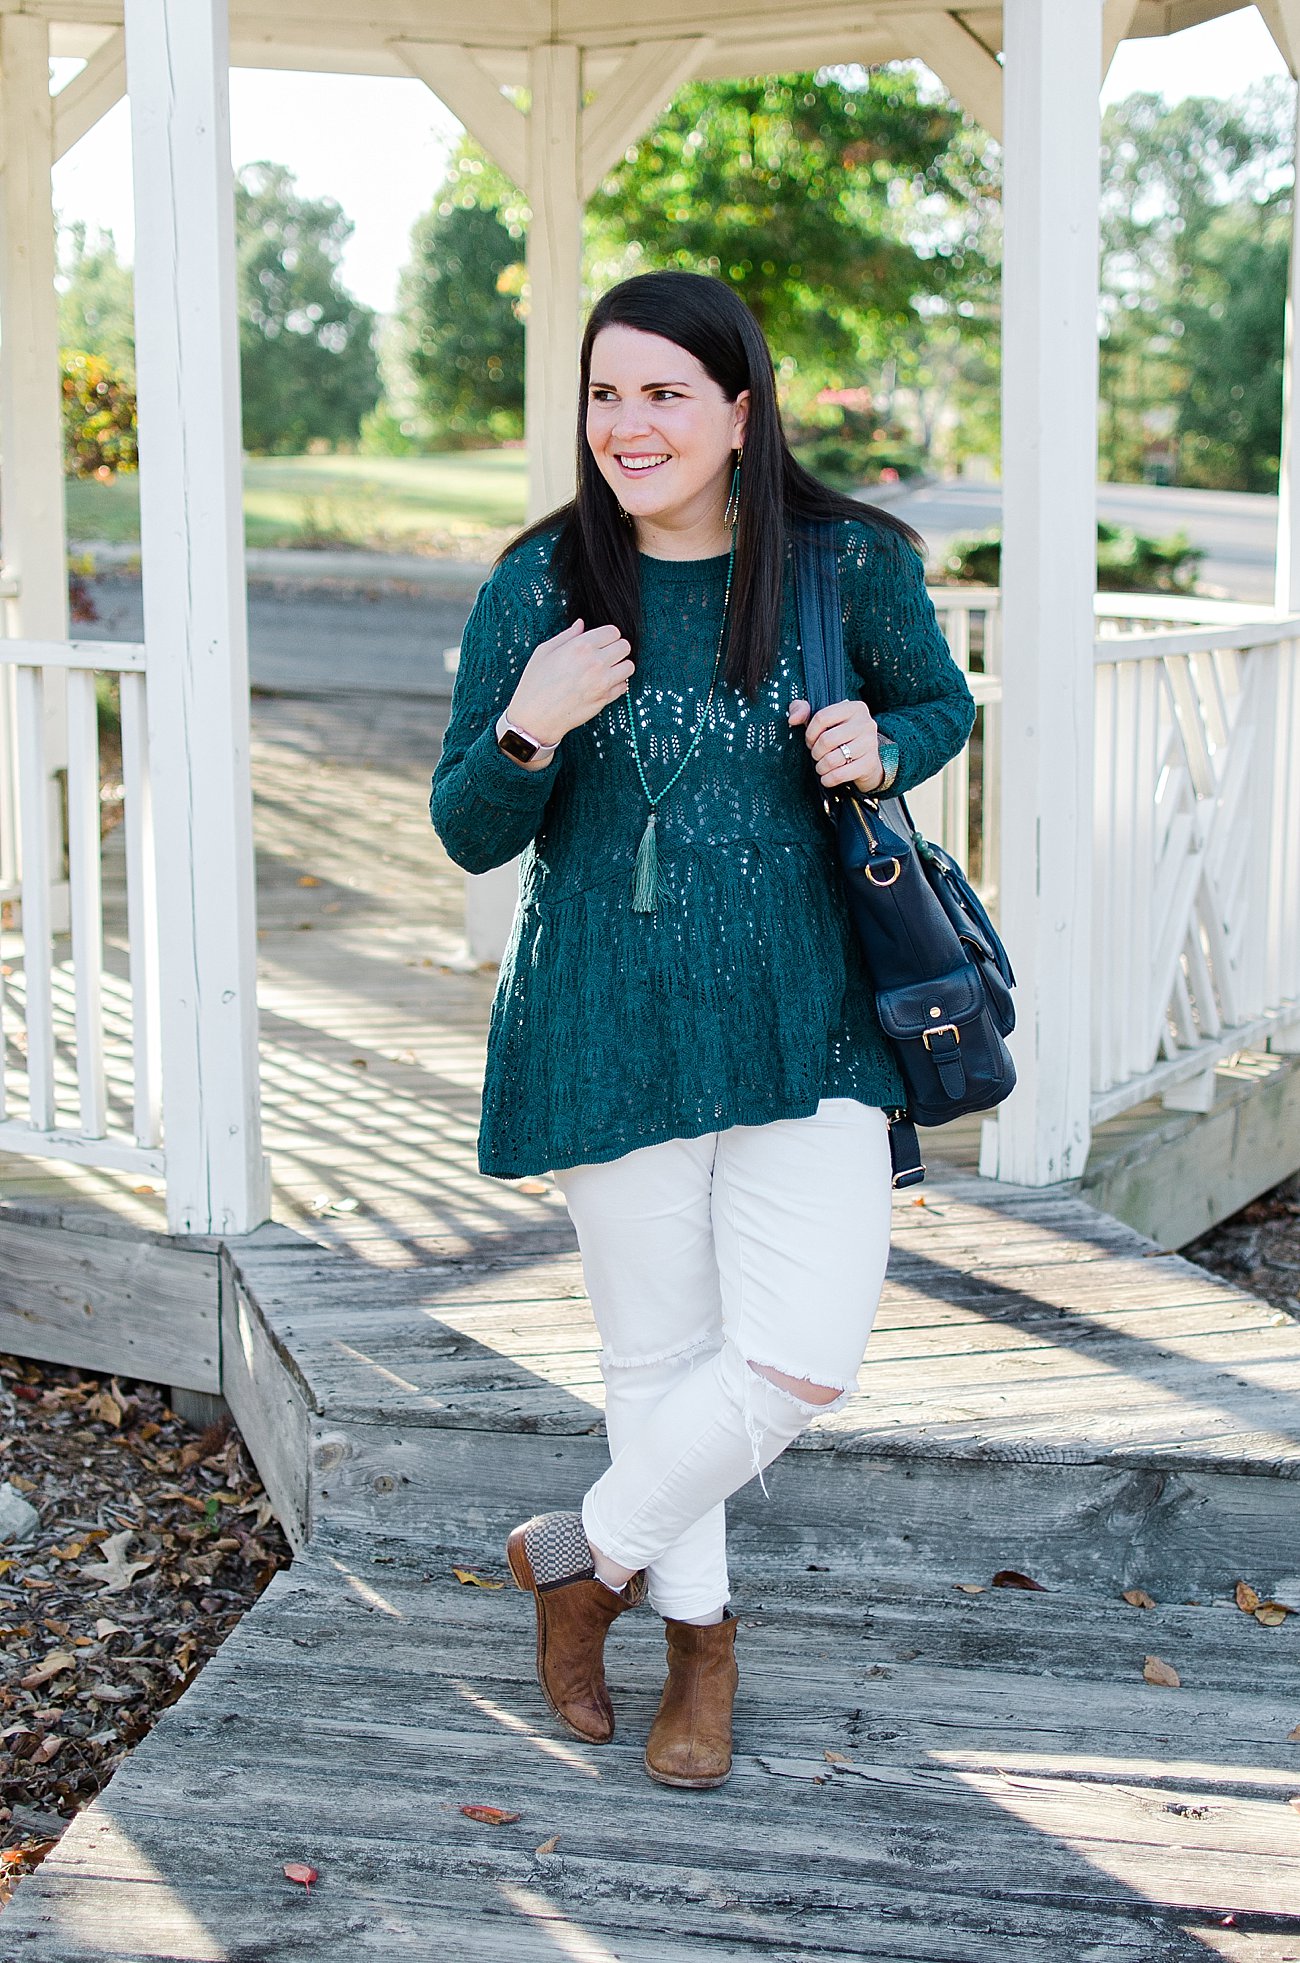 Ethical Fashion Blogger - Grace & Lace Peplum Sweater, Distressed White Jeans, Lily Jade diaper bag, Marquet Fair Trade Jewelry, The Root Collective Espe Booties (9) - Cultivating an Attitude of Gratitude by North Carolina lifestyle blogger Still Being Molly